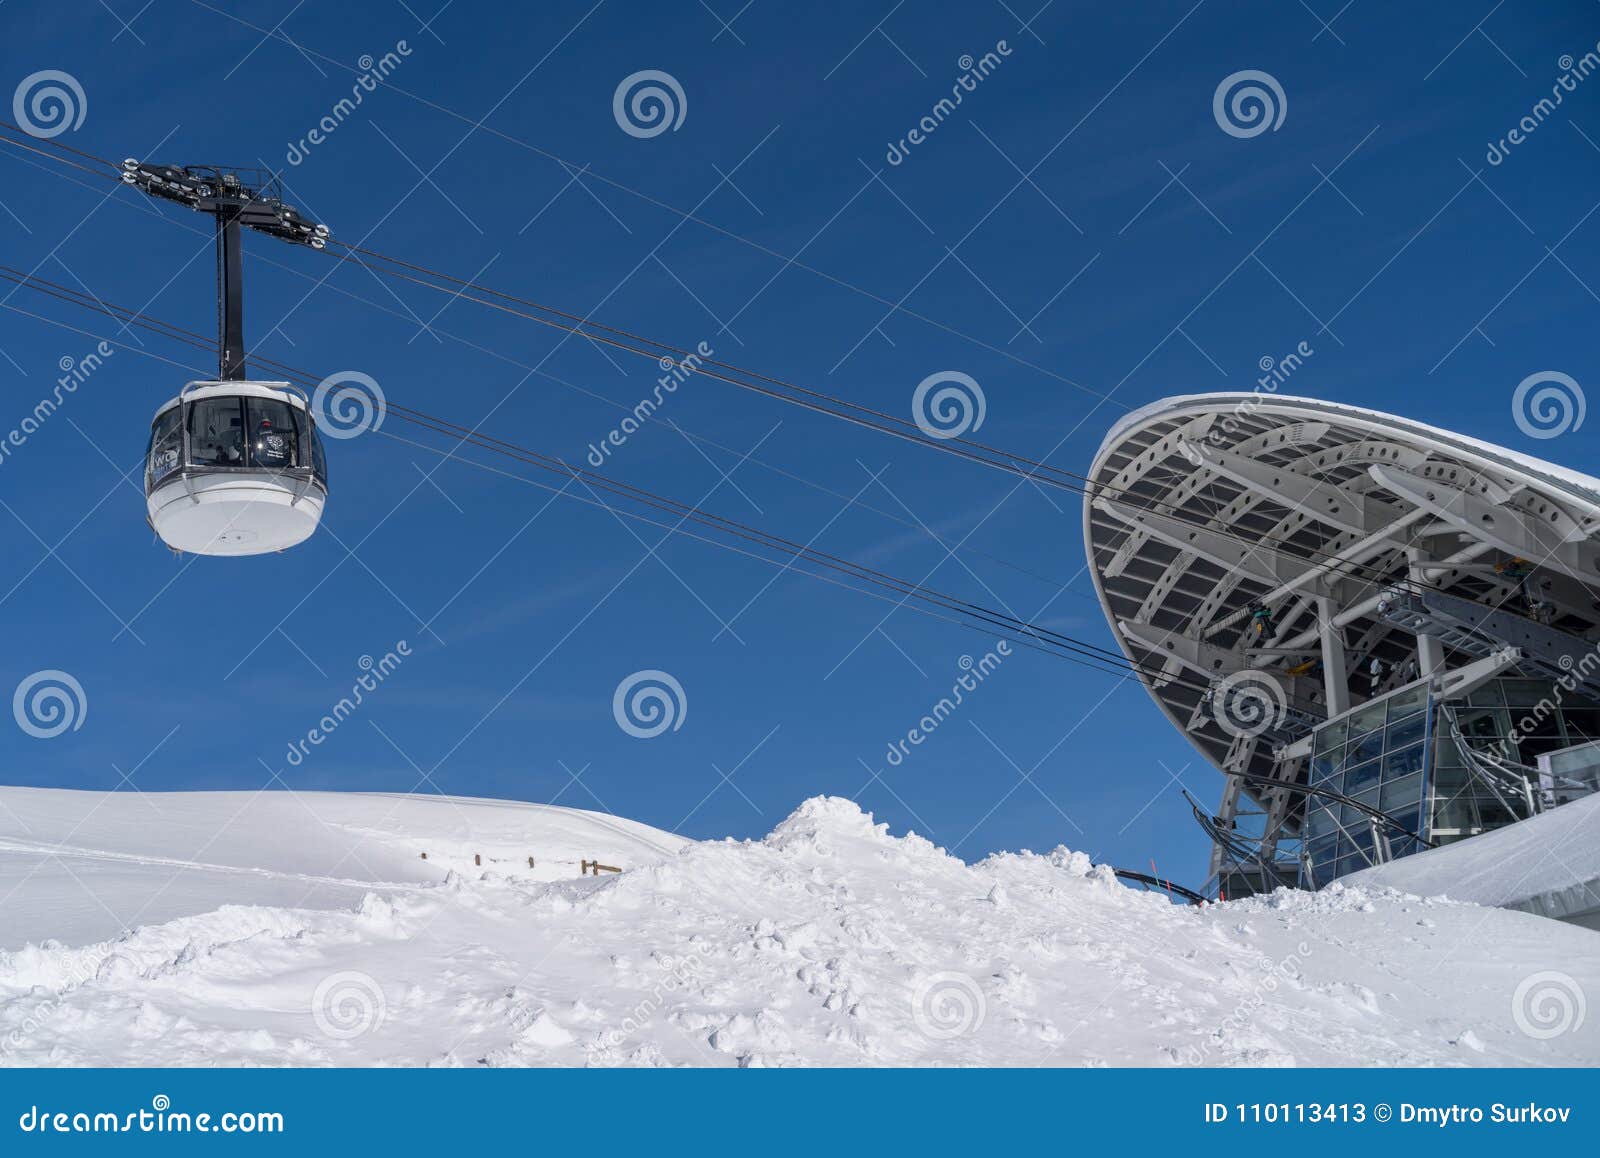 Skyway Monte Bianco, Courmayeur, Italy Editorial Stock Photo - Image of resort: 110113413